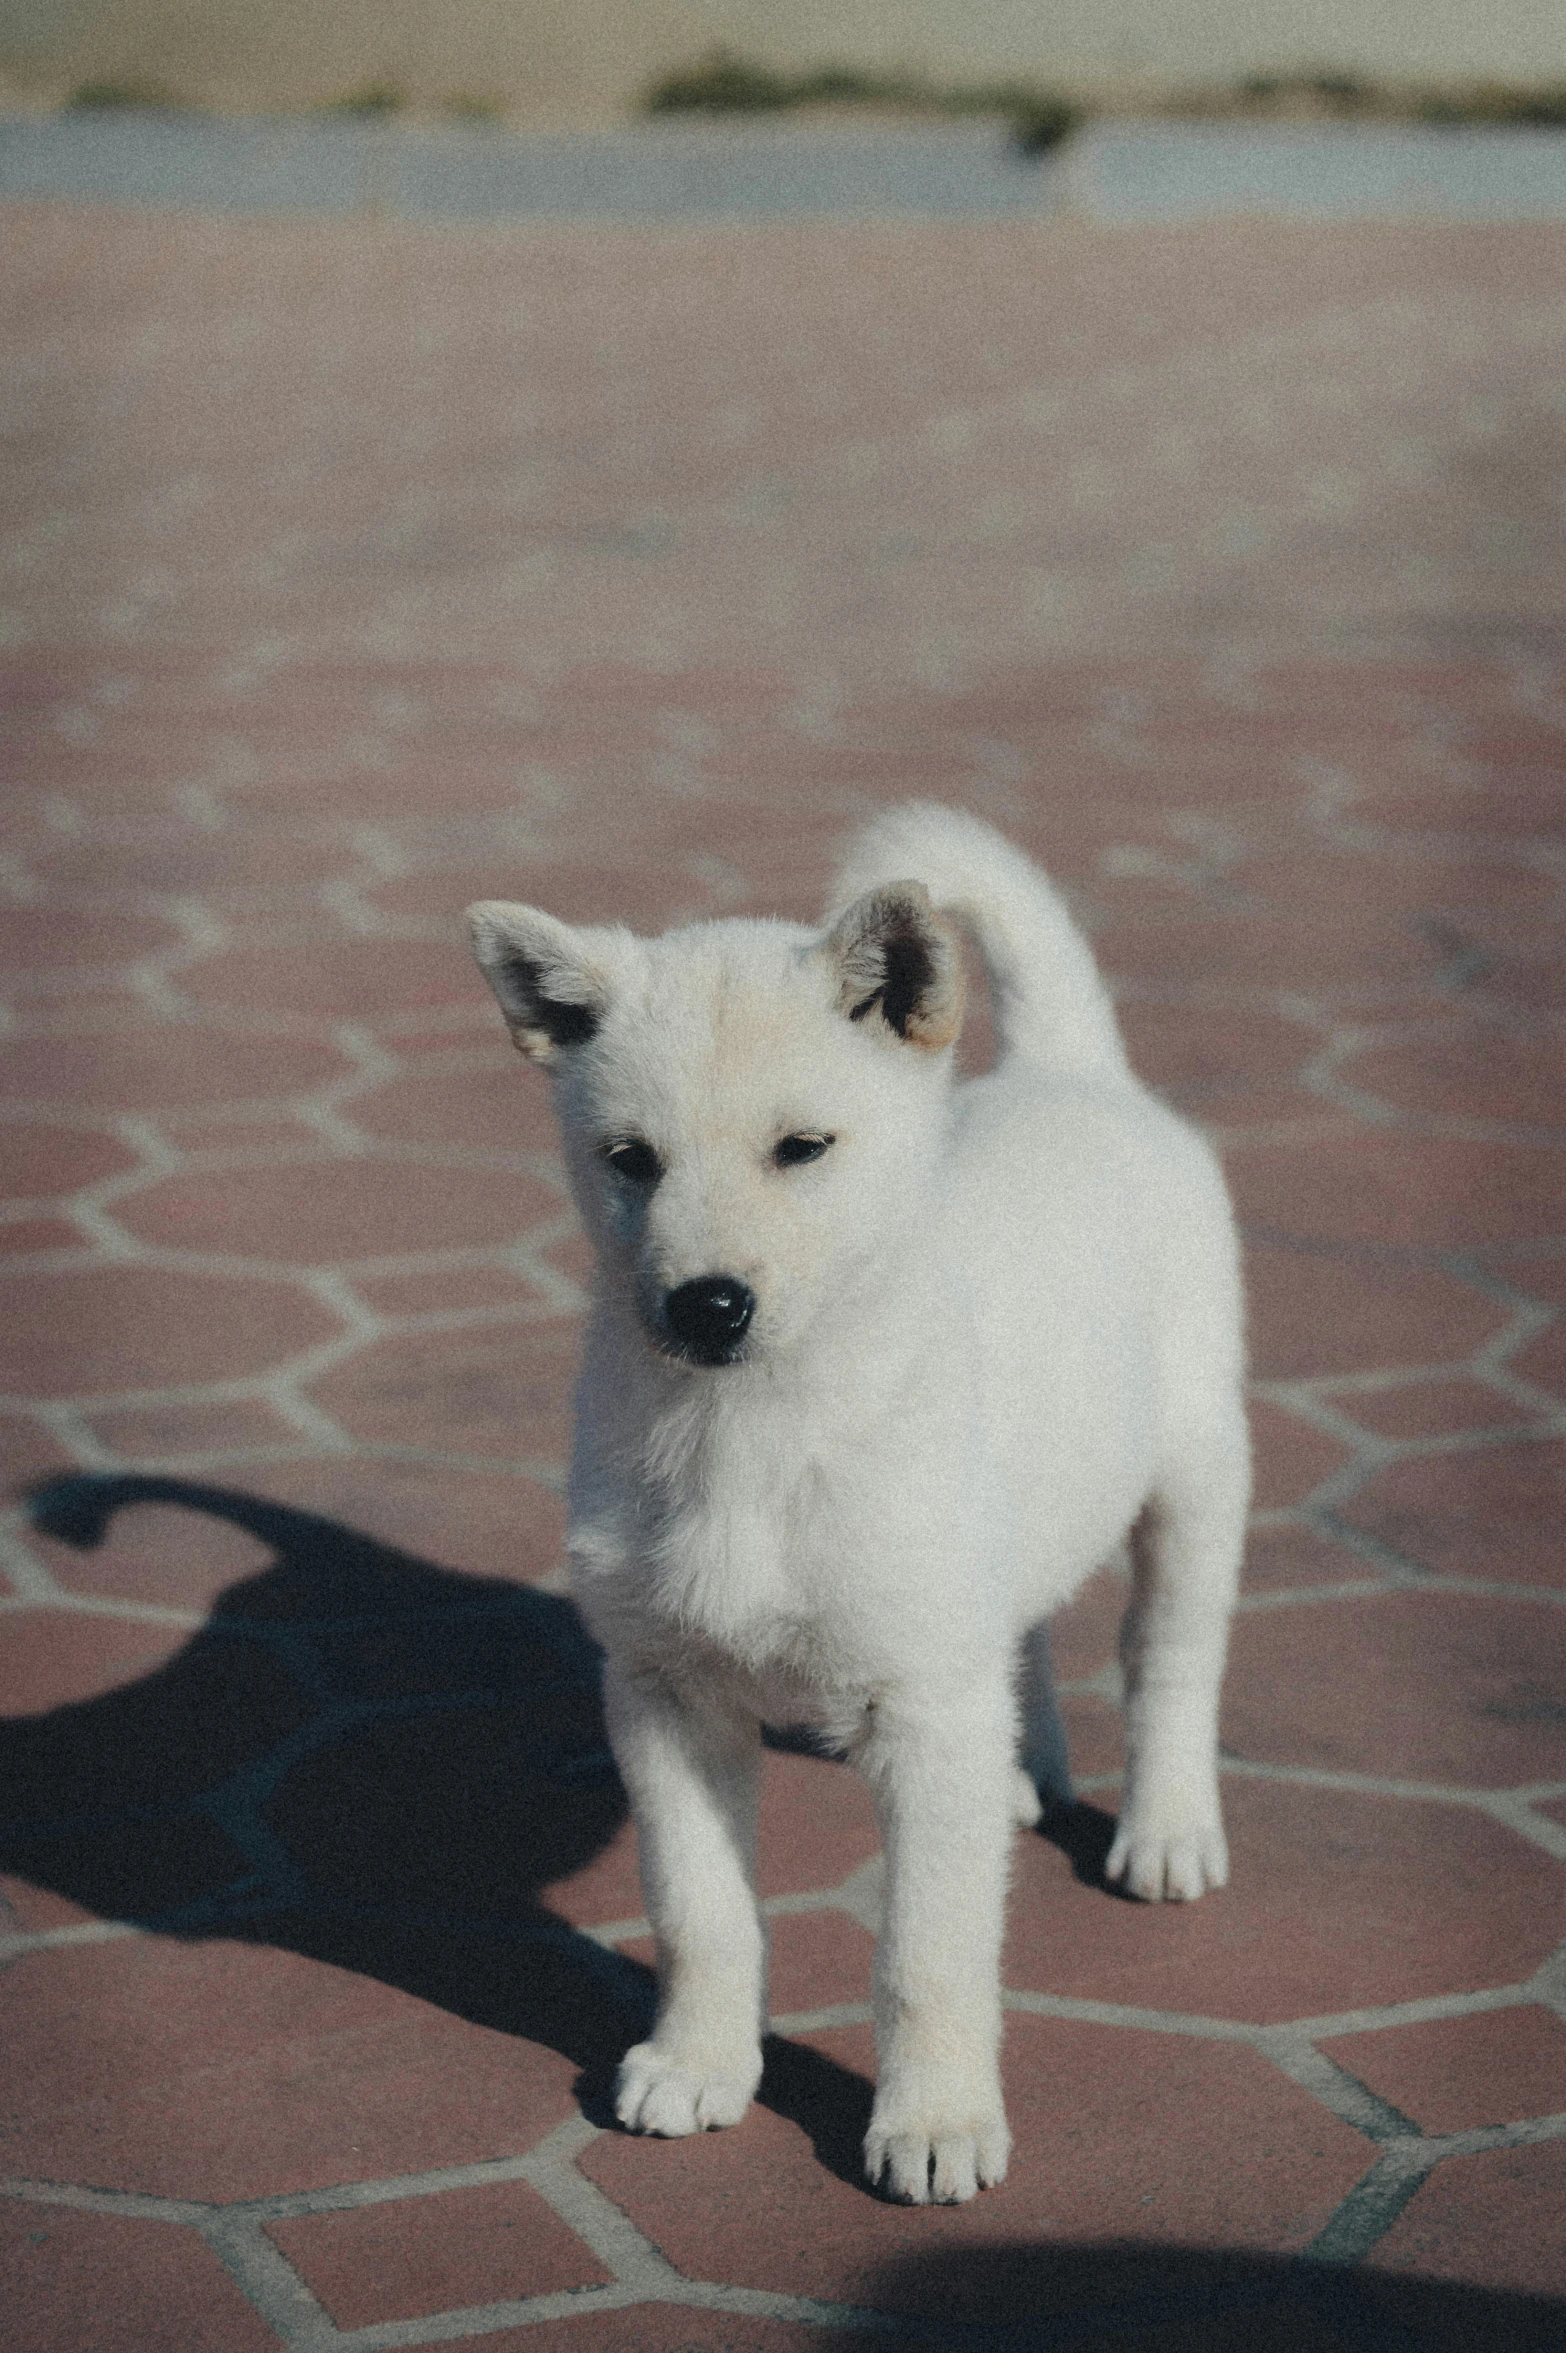 small dog walking on a brick surface with a shadow